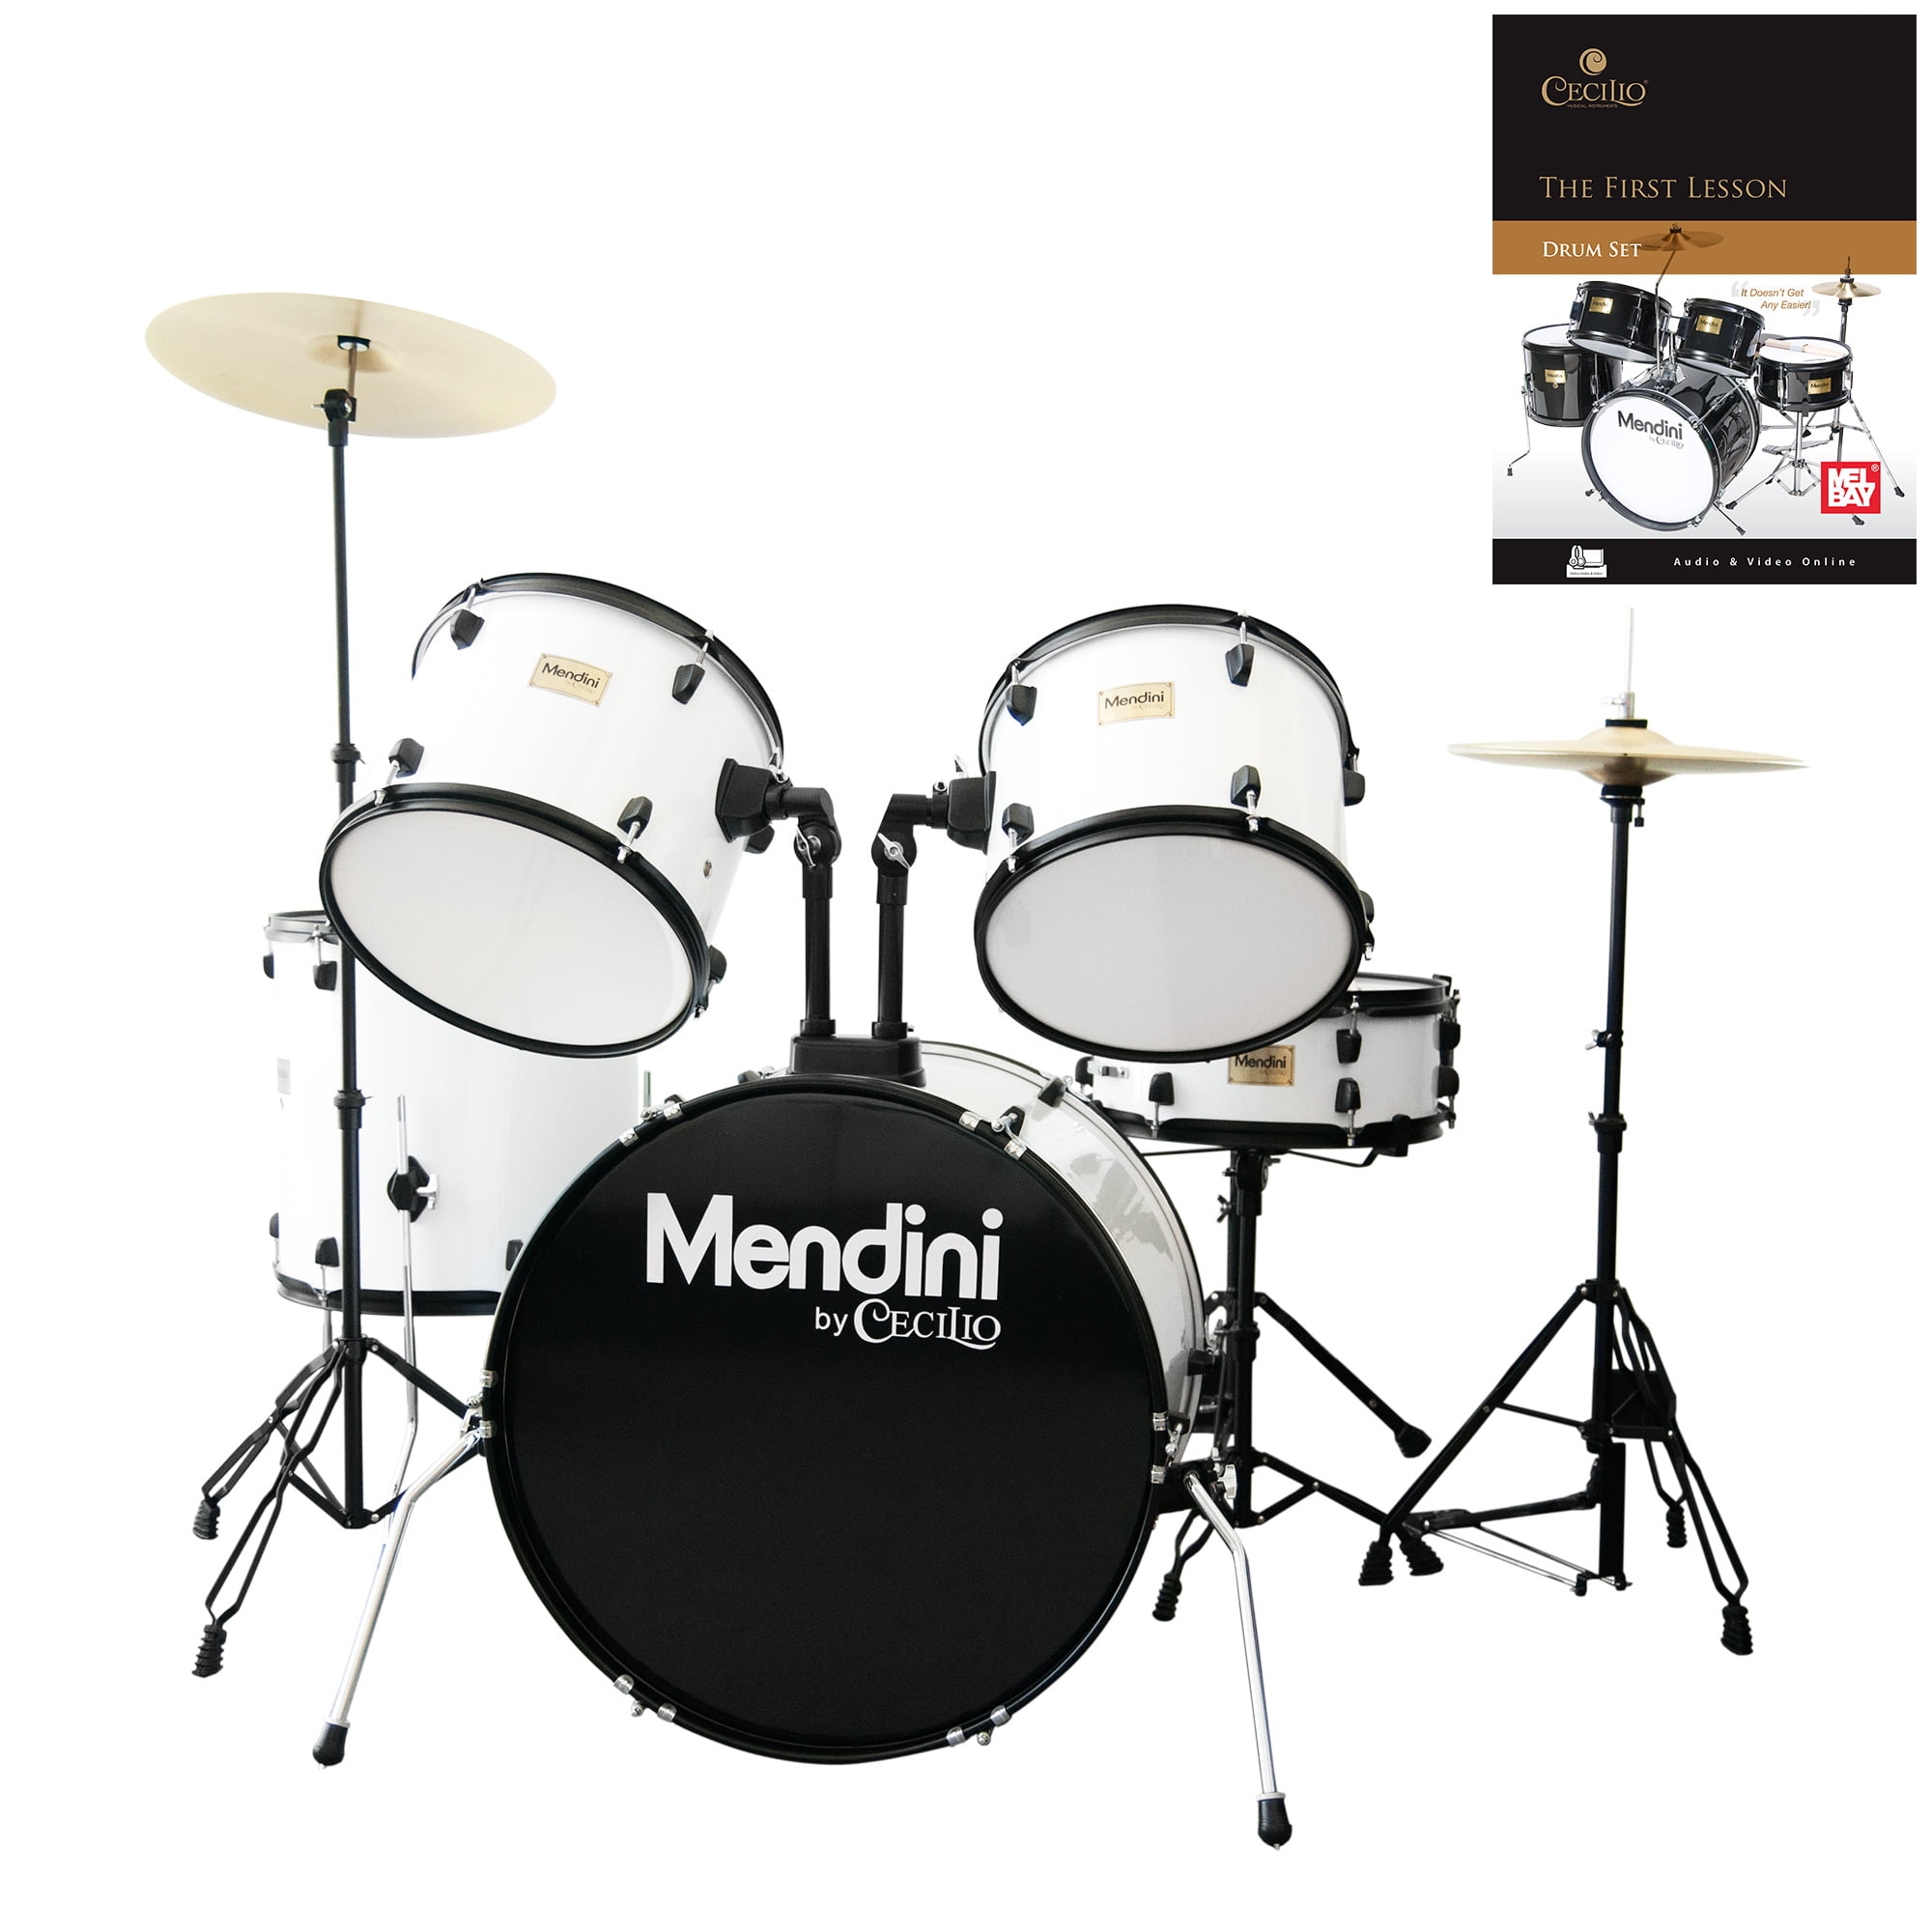 Mendini by Cecilio Complete Full Size 5-Piece Adult Drum Set w/ Cymbals  Pedal Throne Sticks, Lesson Book, White MDS80-WH - Walmart.com